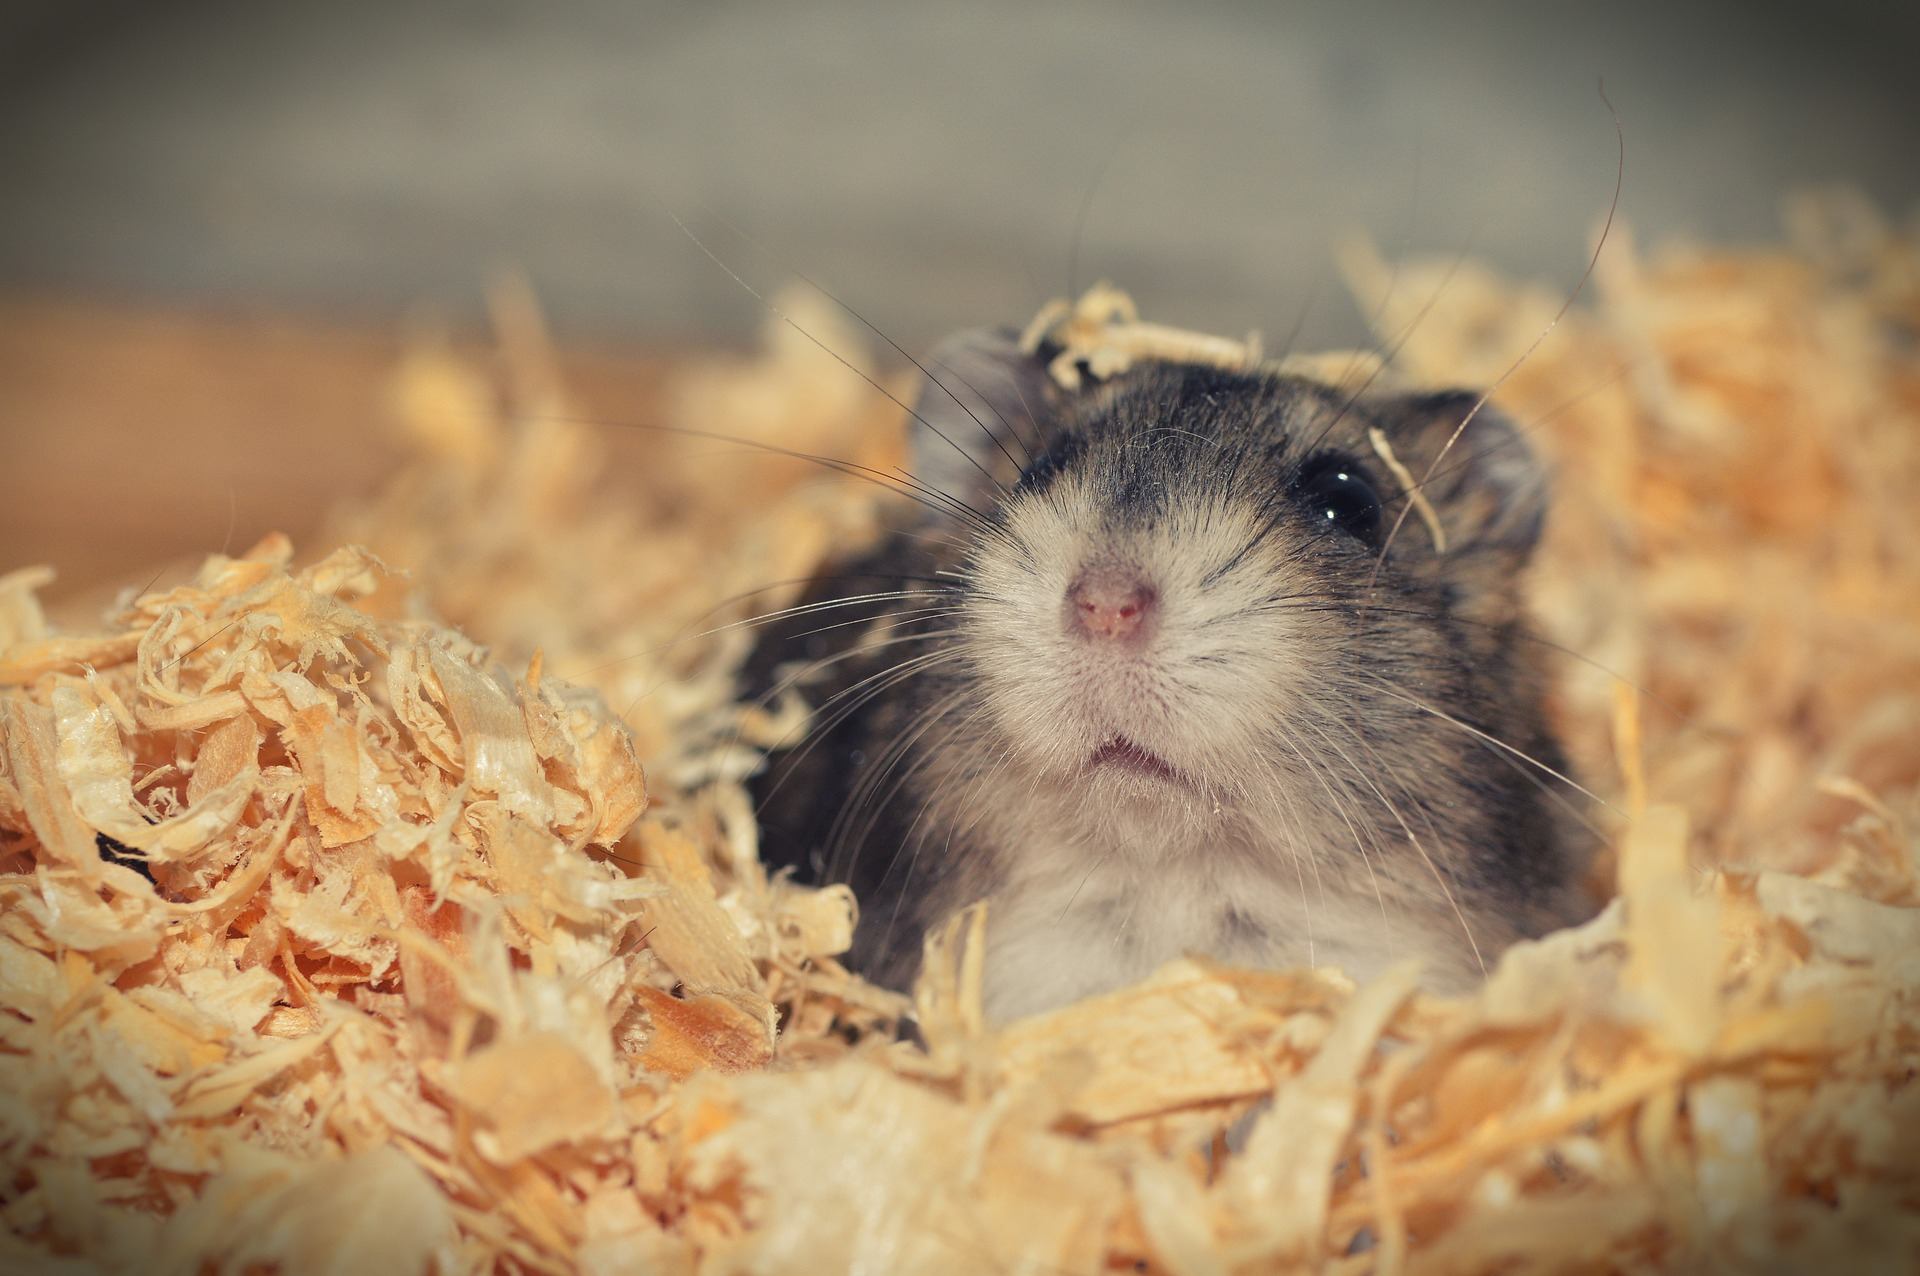 How Long Do Hamsters Live?